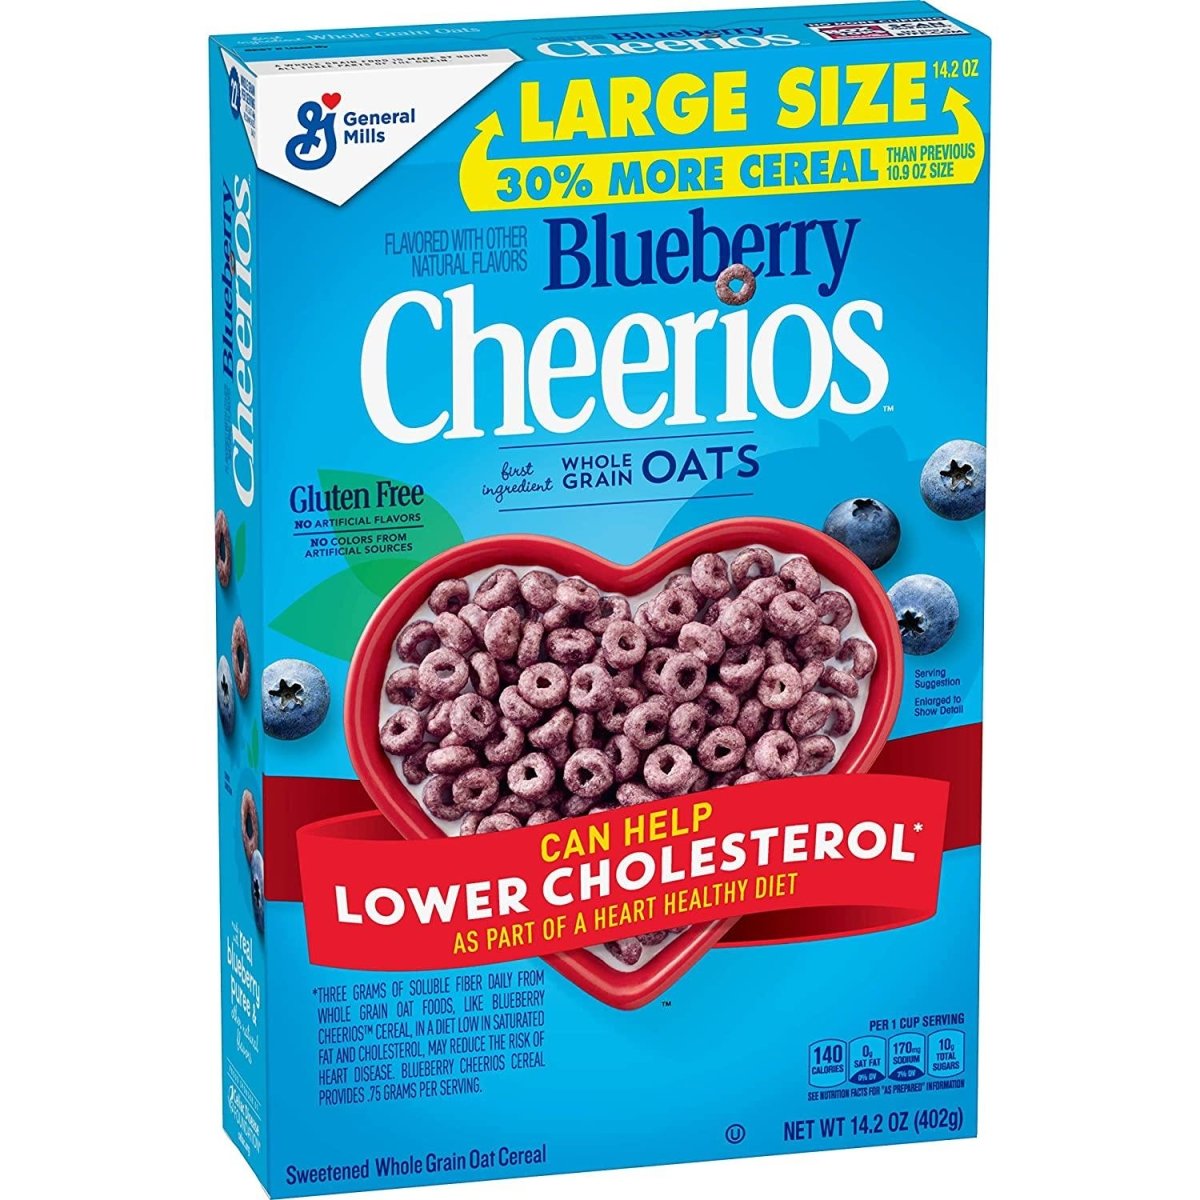 Blueberry Cheerios Family Size 402g - Candy Mail UK